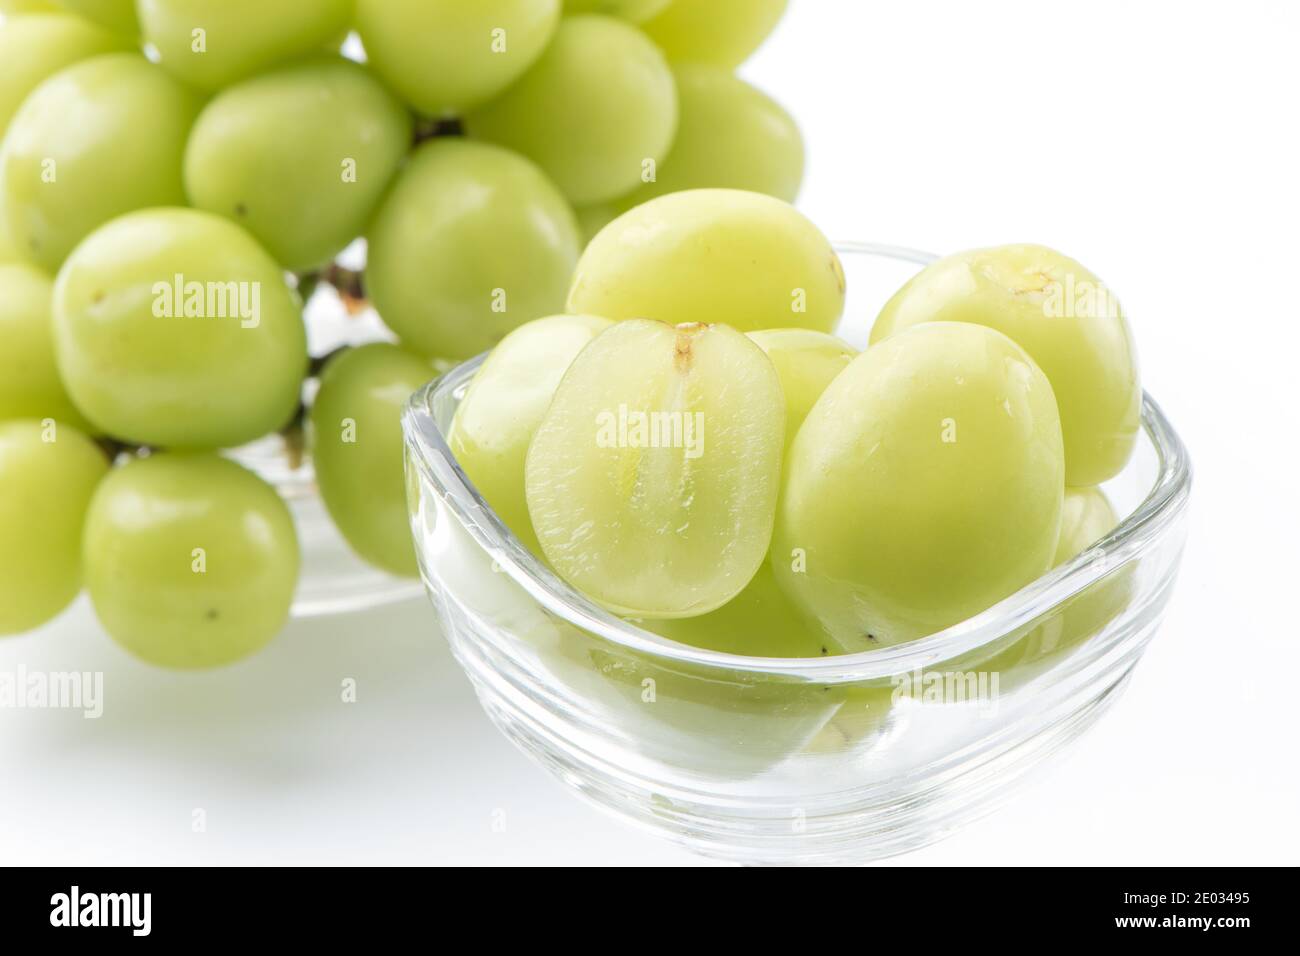 Green Seedless Grape Isolated Grapes On White With Clipping Path